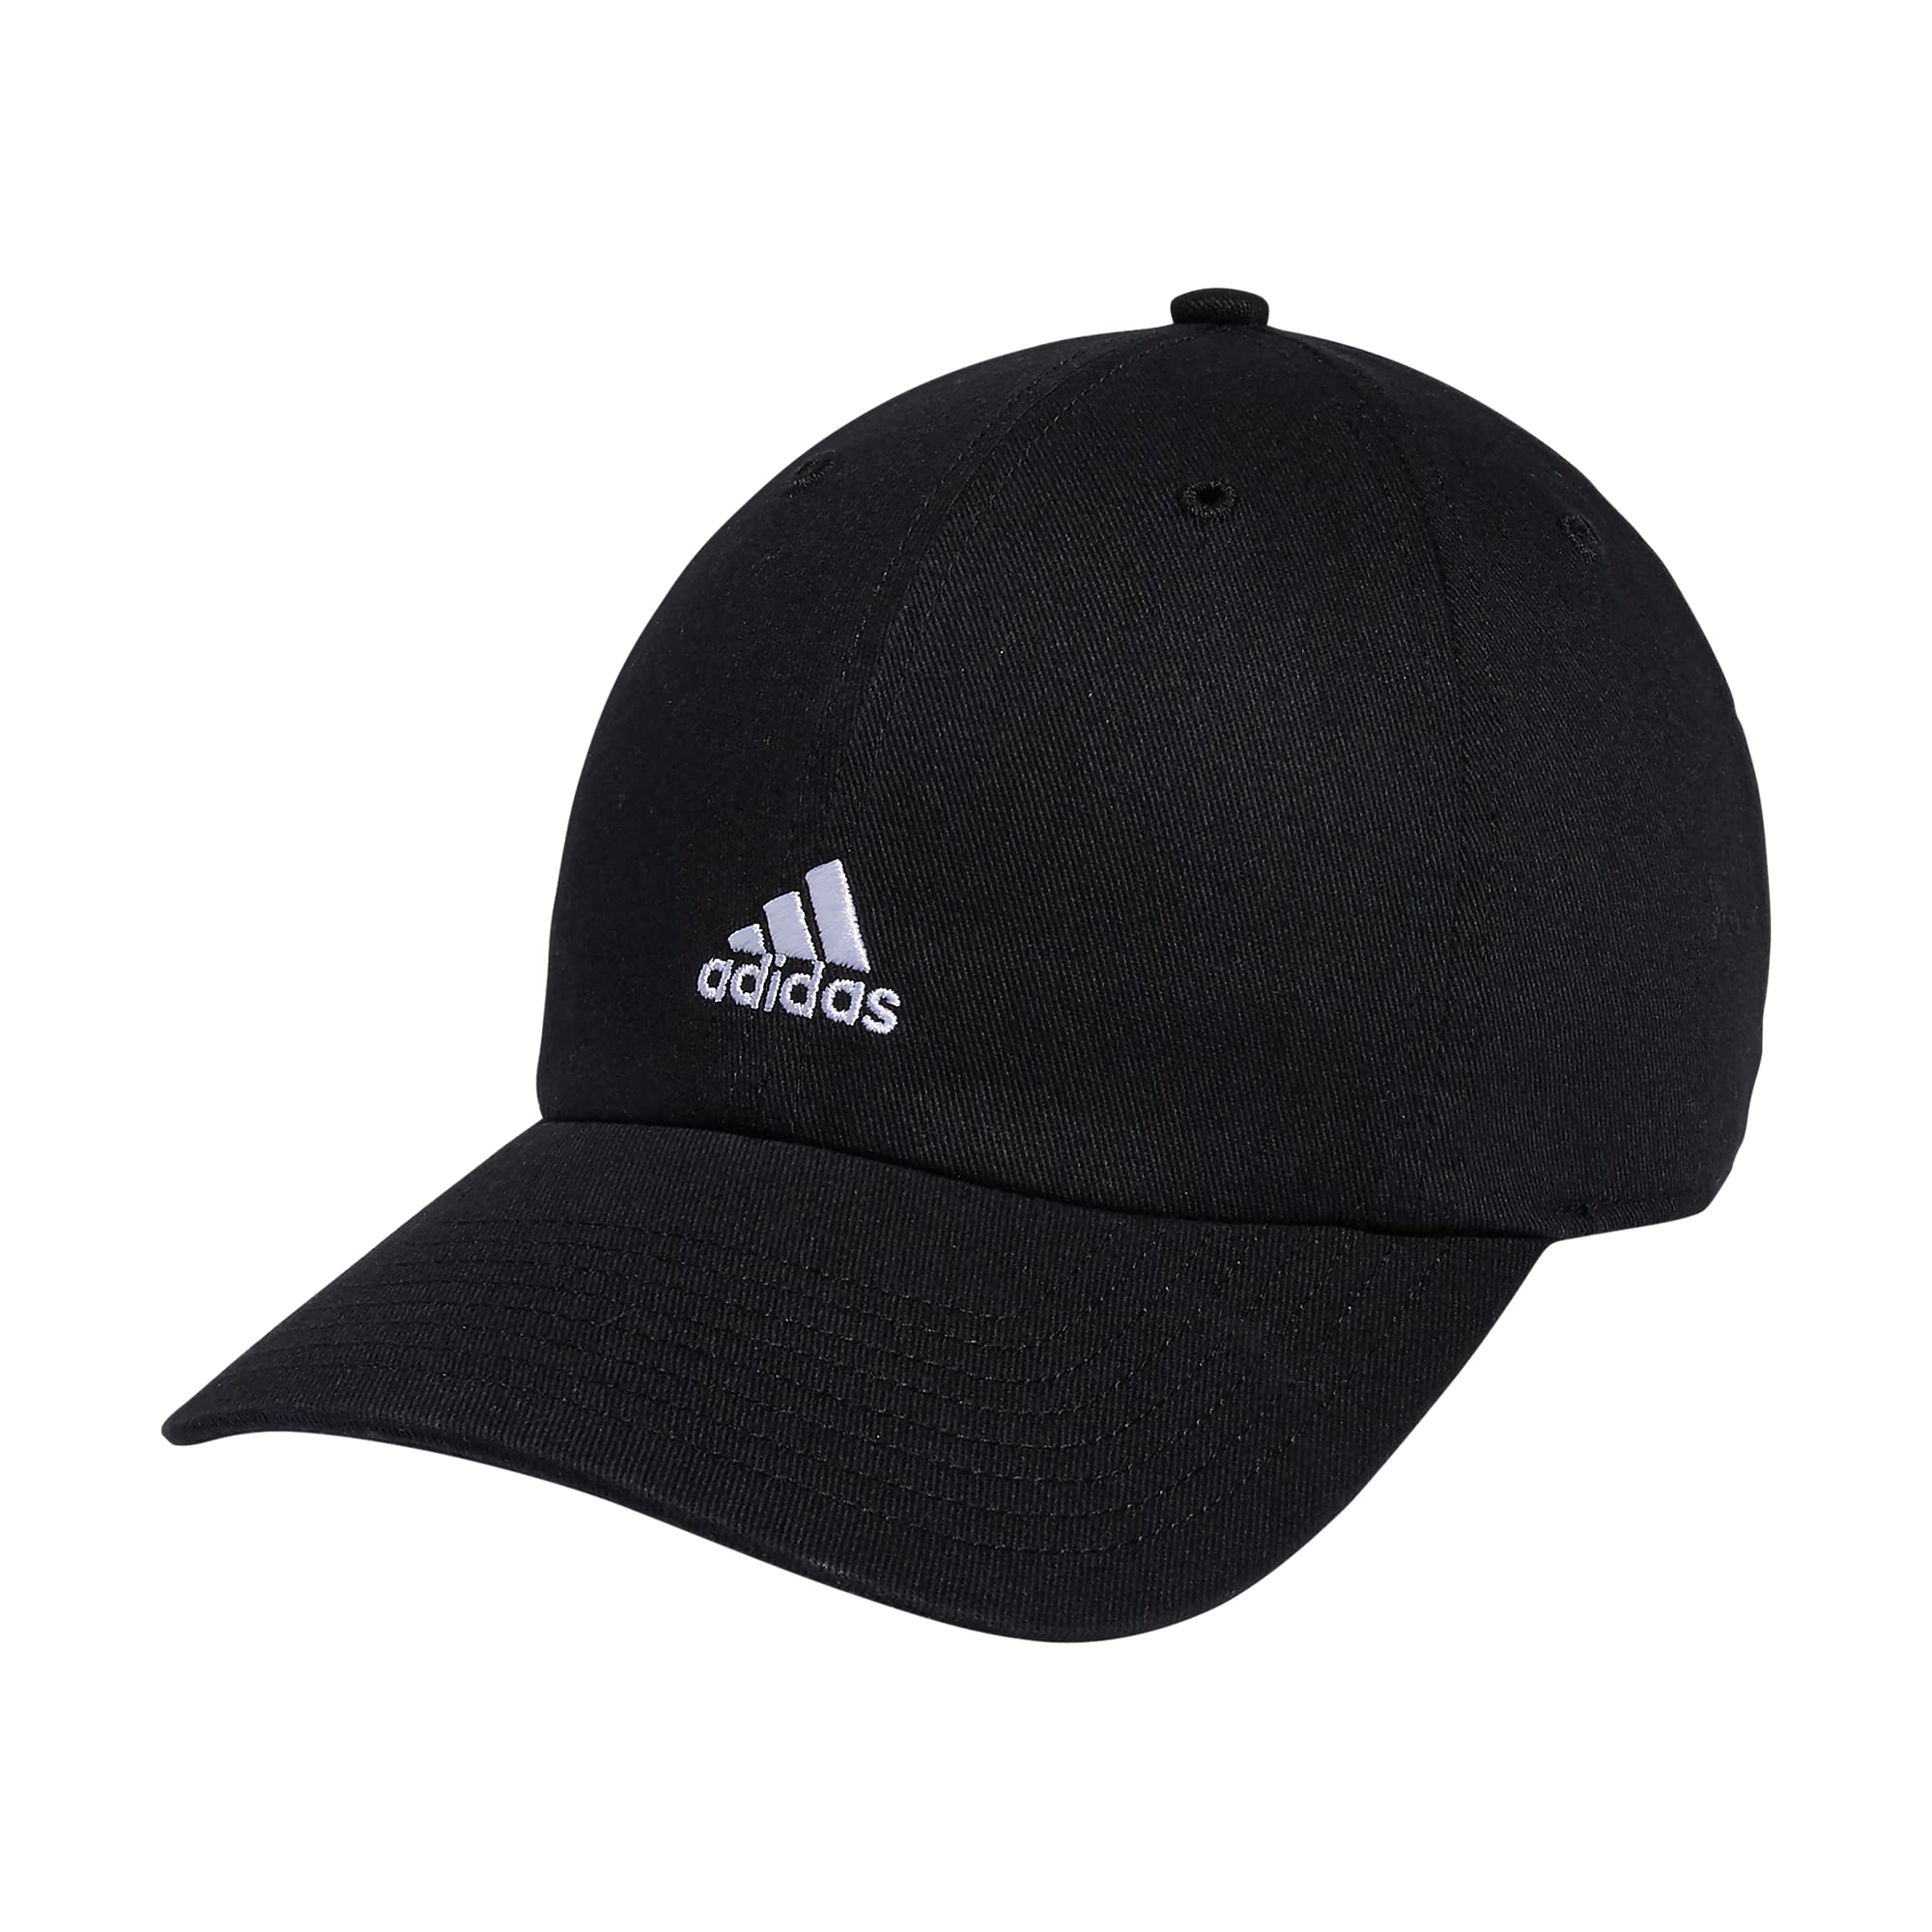 adidas Women's Saturday Relaxed Adjustable Cap (Black) $9.88 + Free Shipping w/ Prime or on $25+